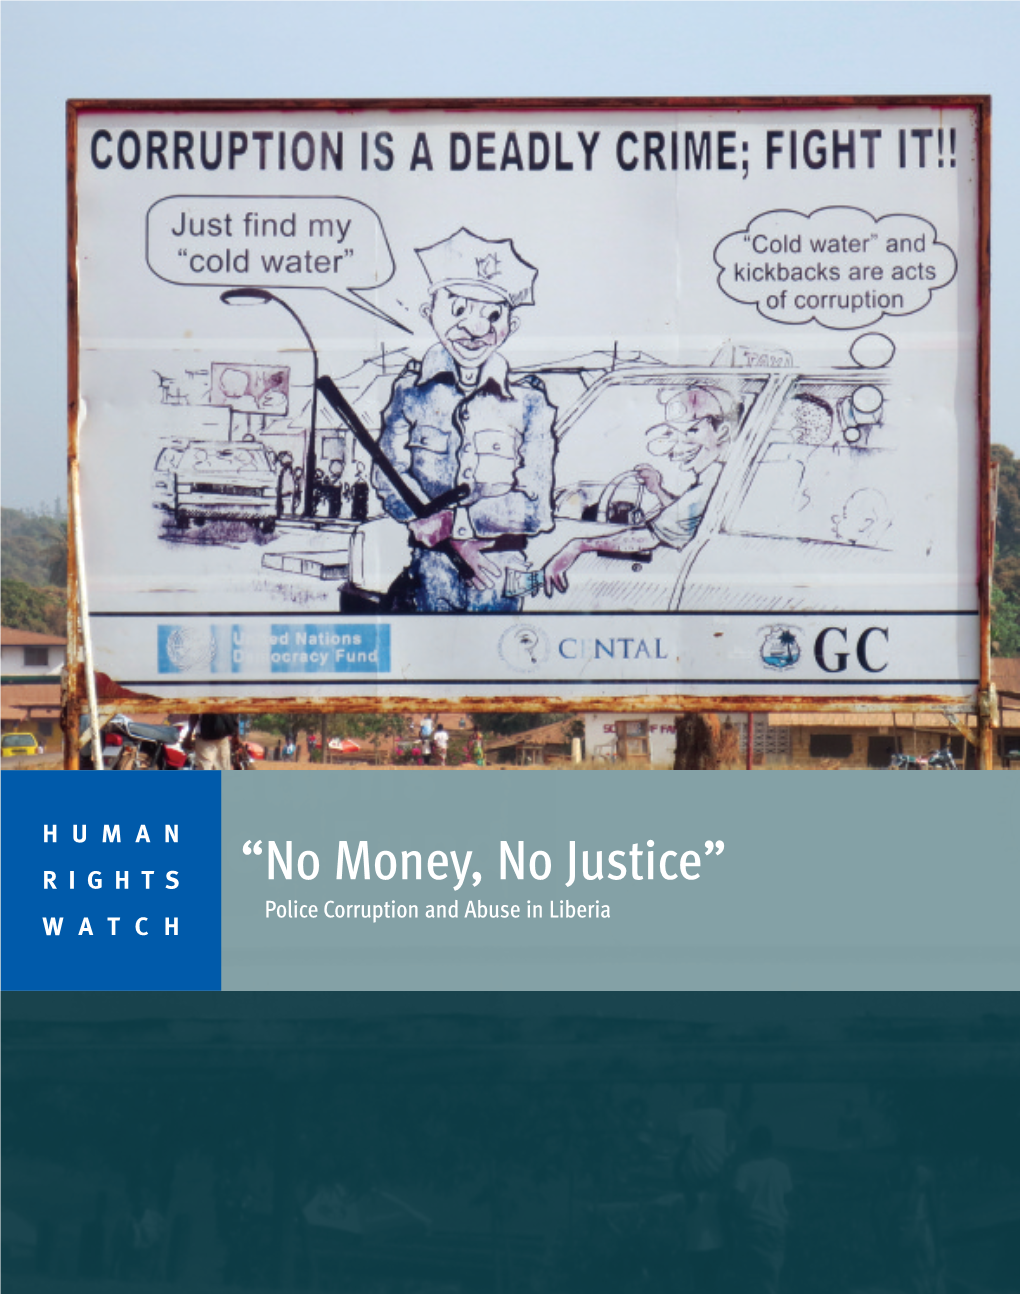 “No Money, No Justice”: Police Corruption and Abuse in Liberia Documents the Impact of Police Corruption on the Administration of Justice